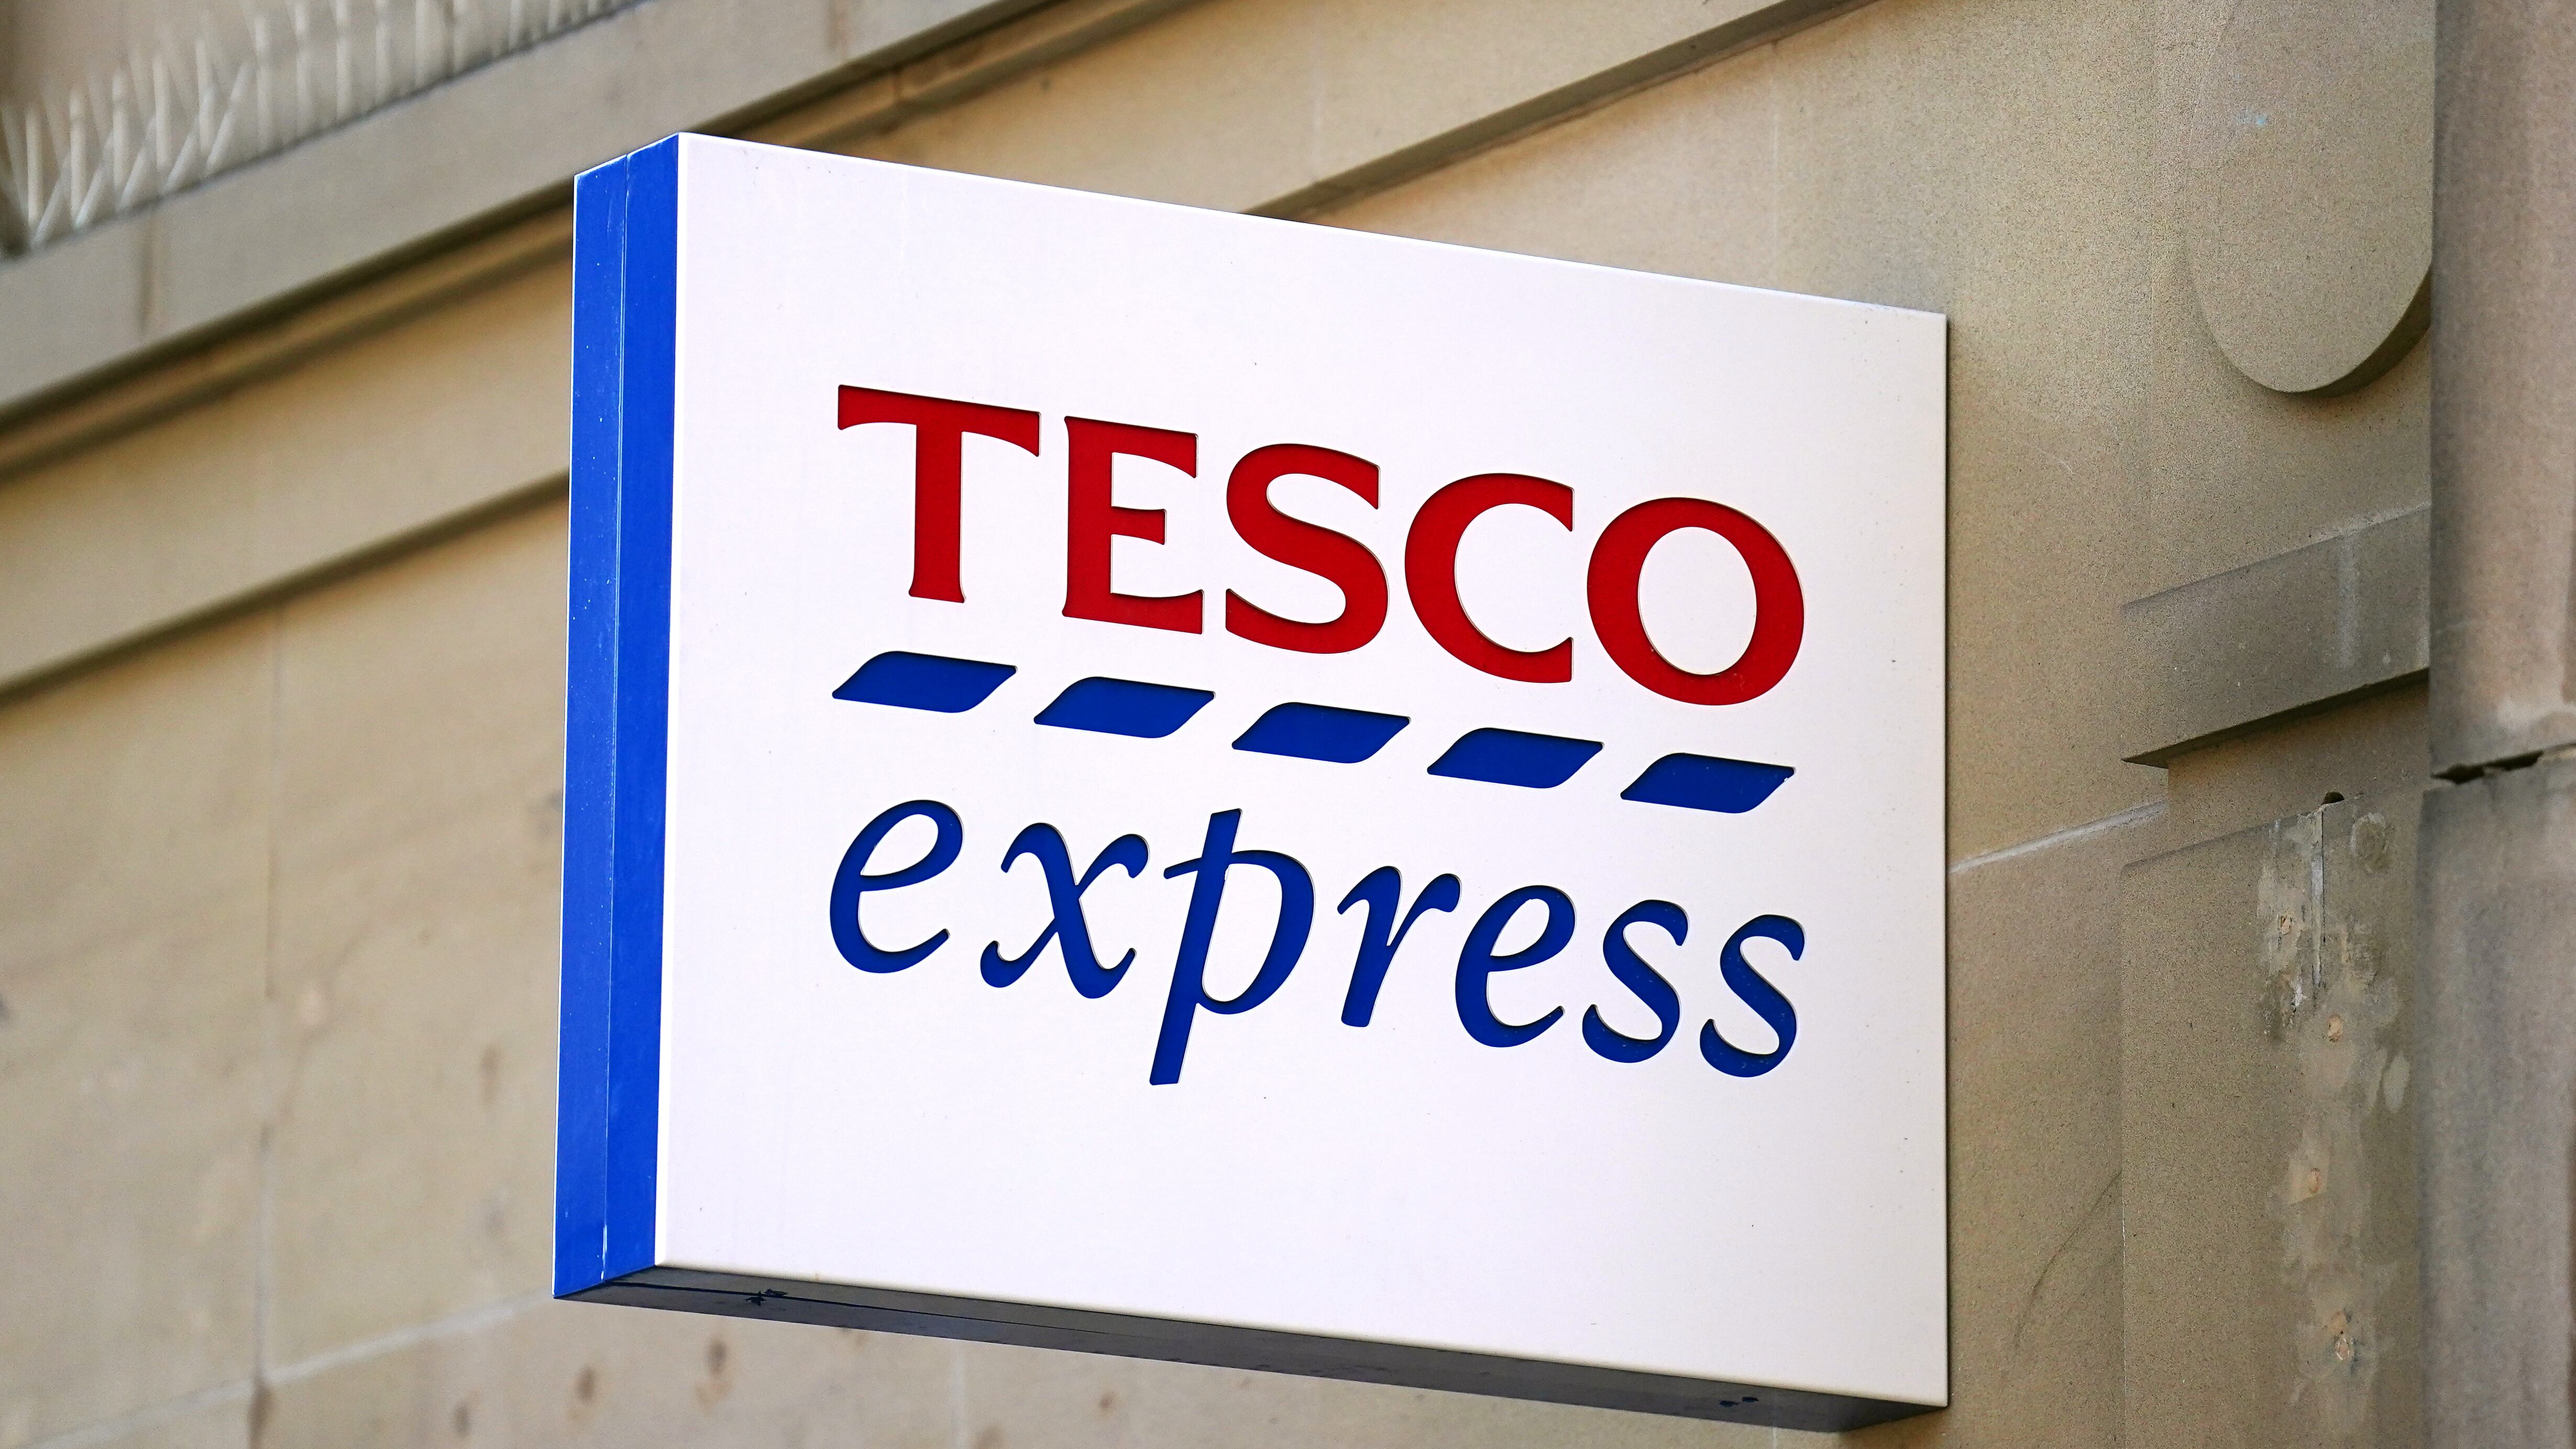 The company said sales of Tesco Finest products were ‘particularly strong’